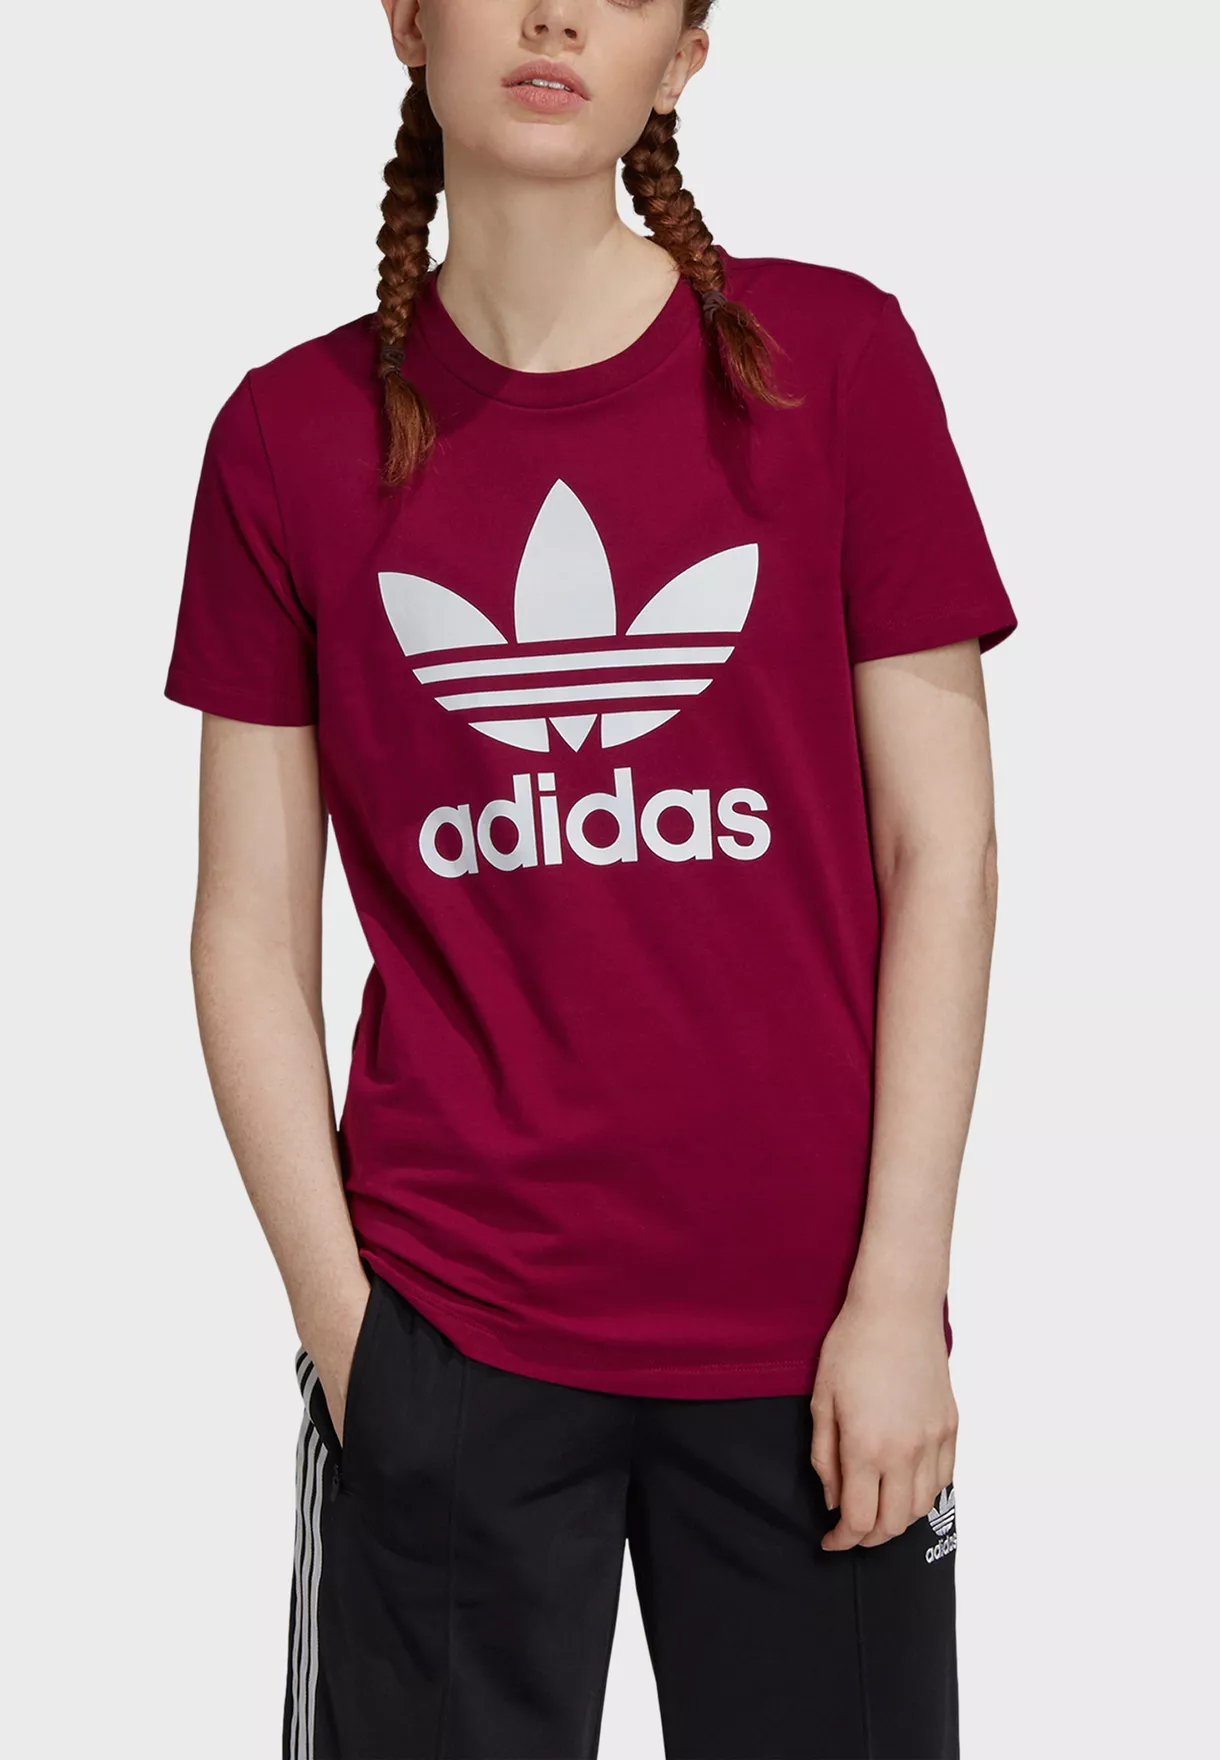 Get Adidas Originals pieces with 50% off + 10% off using the code